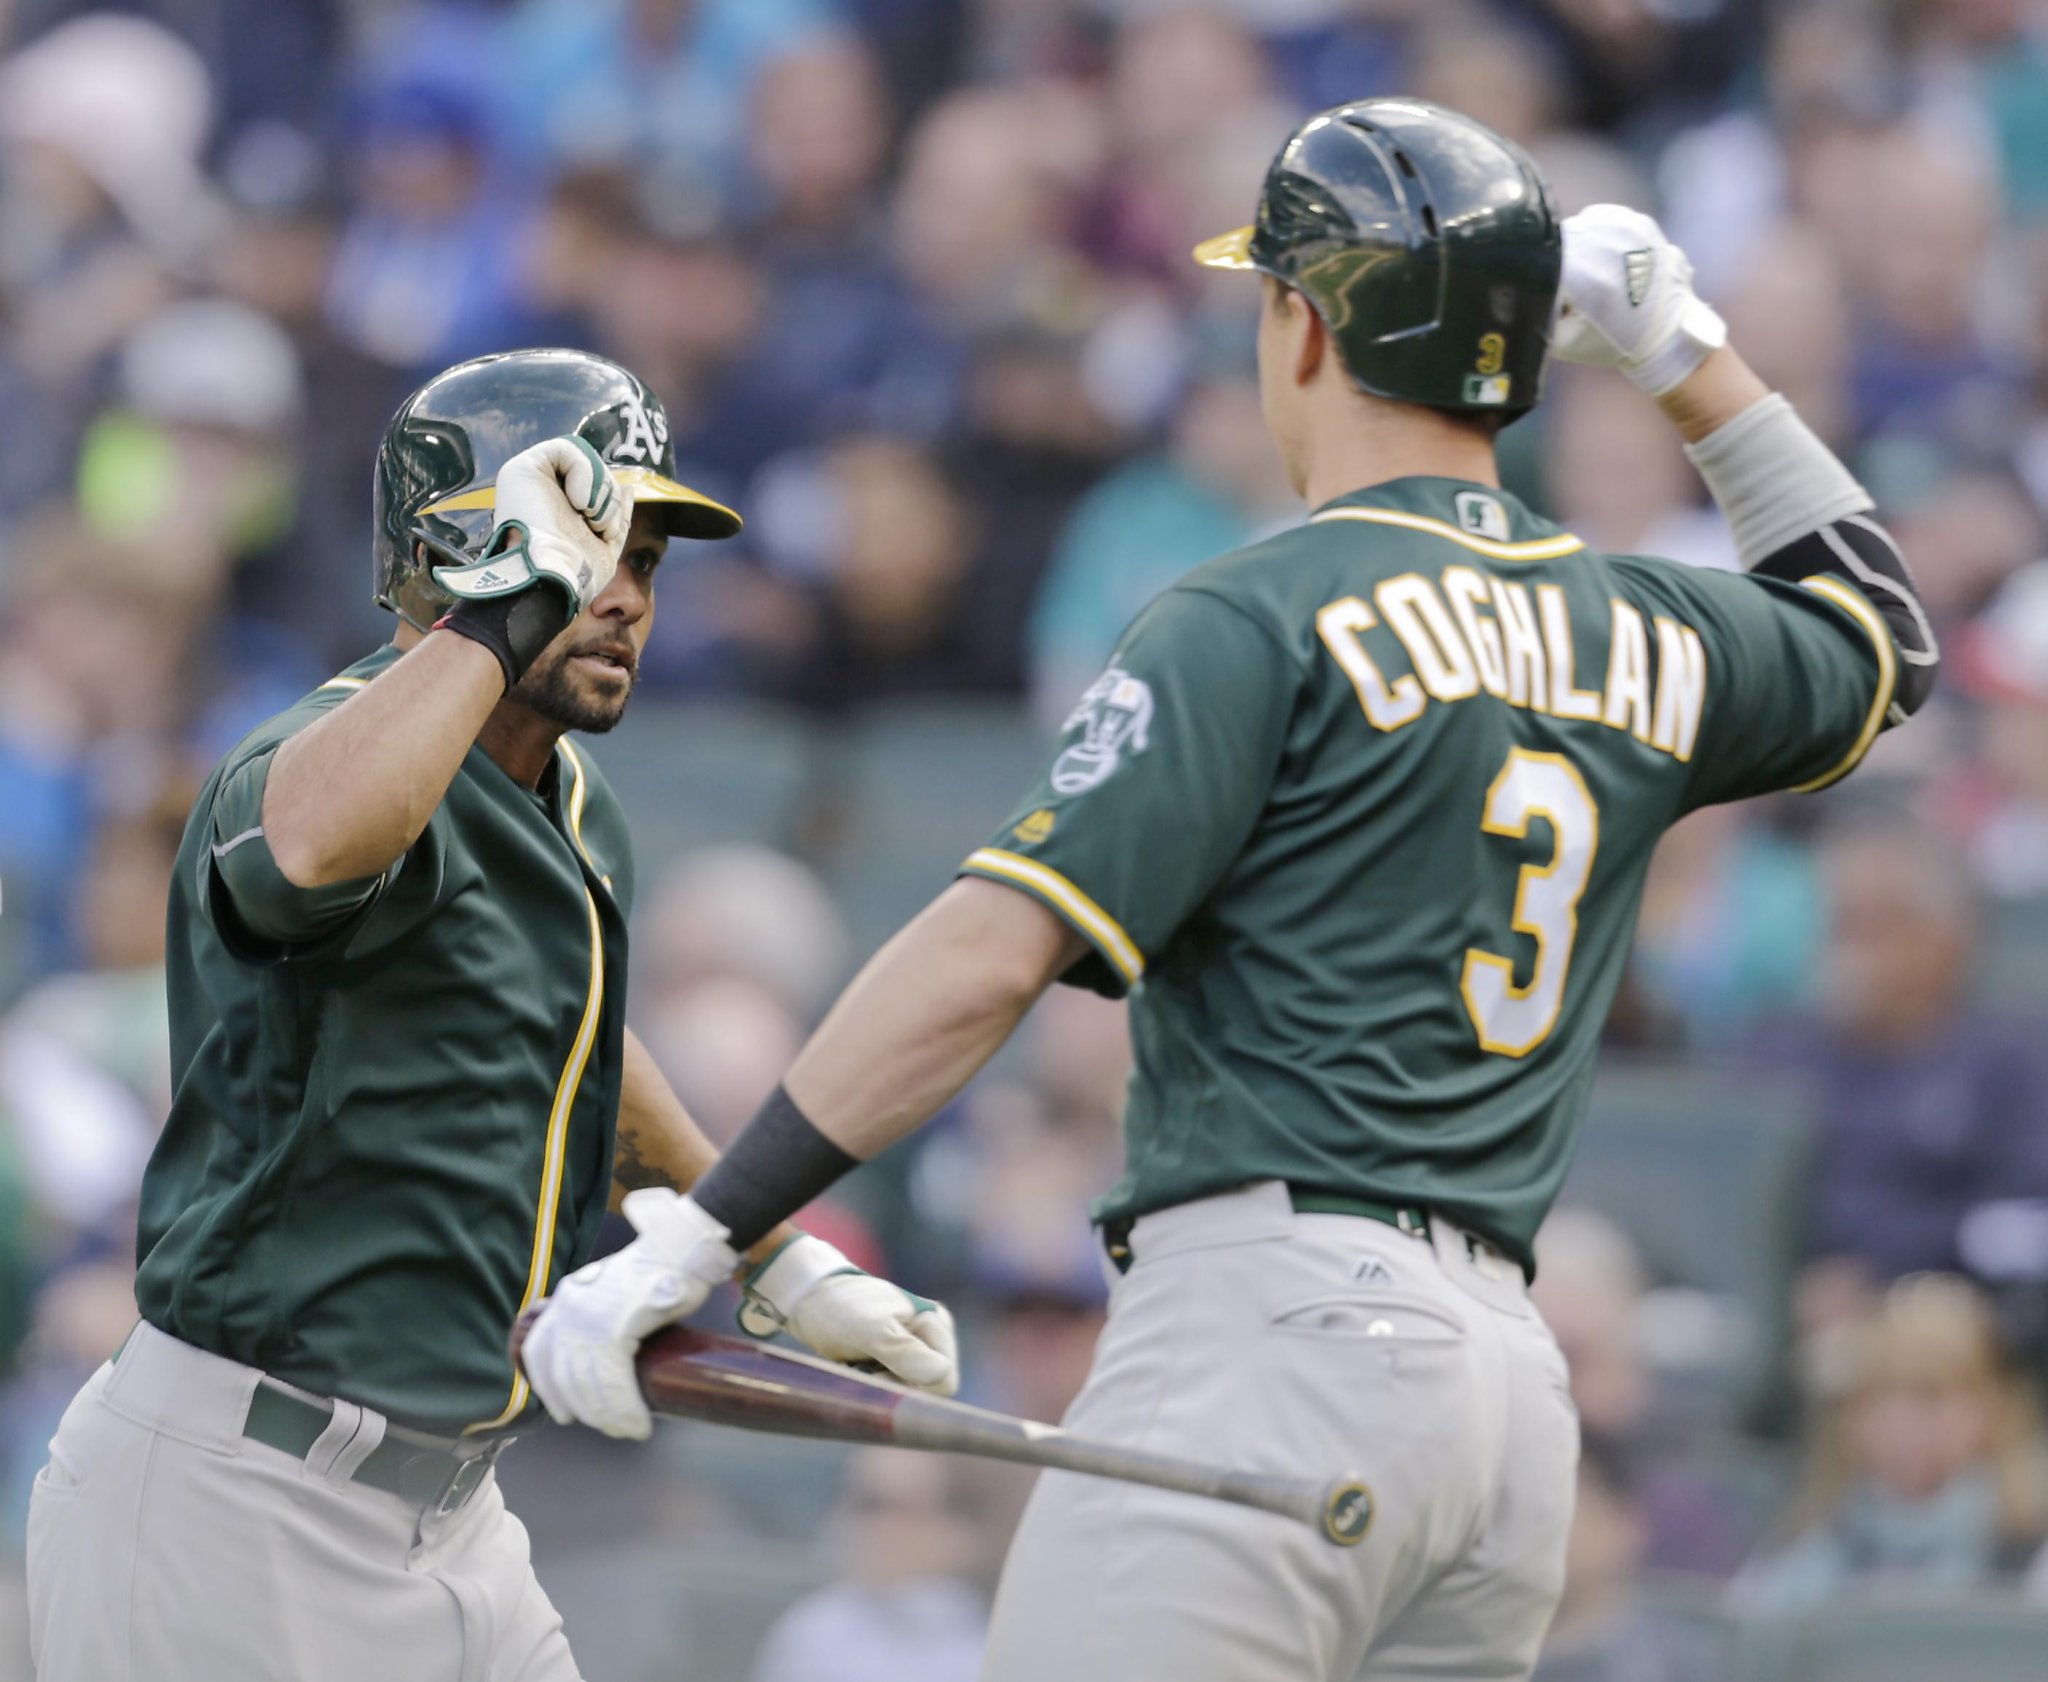 Coco Crisp to Cleveland Indians deal official, pitcher Colt Hynes